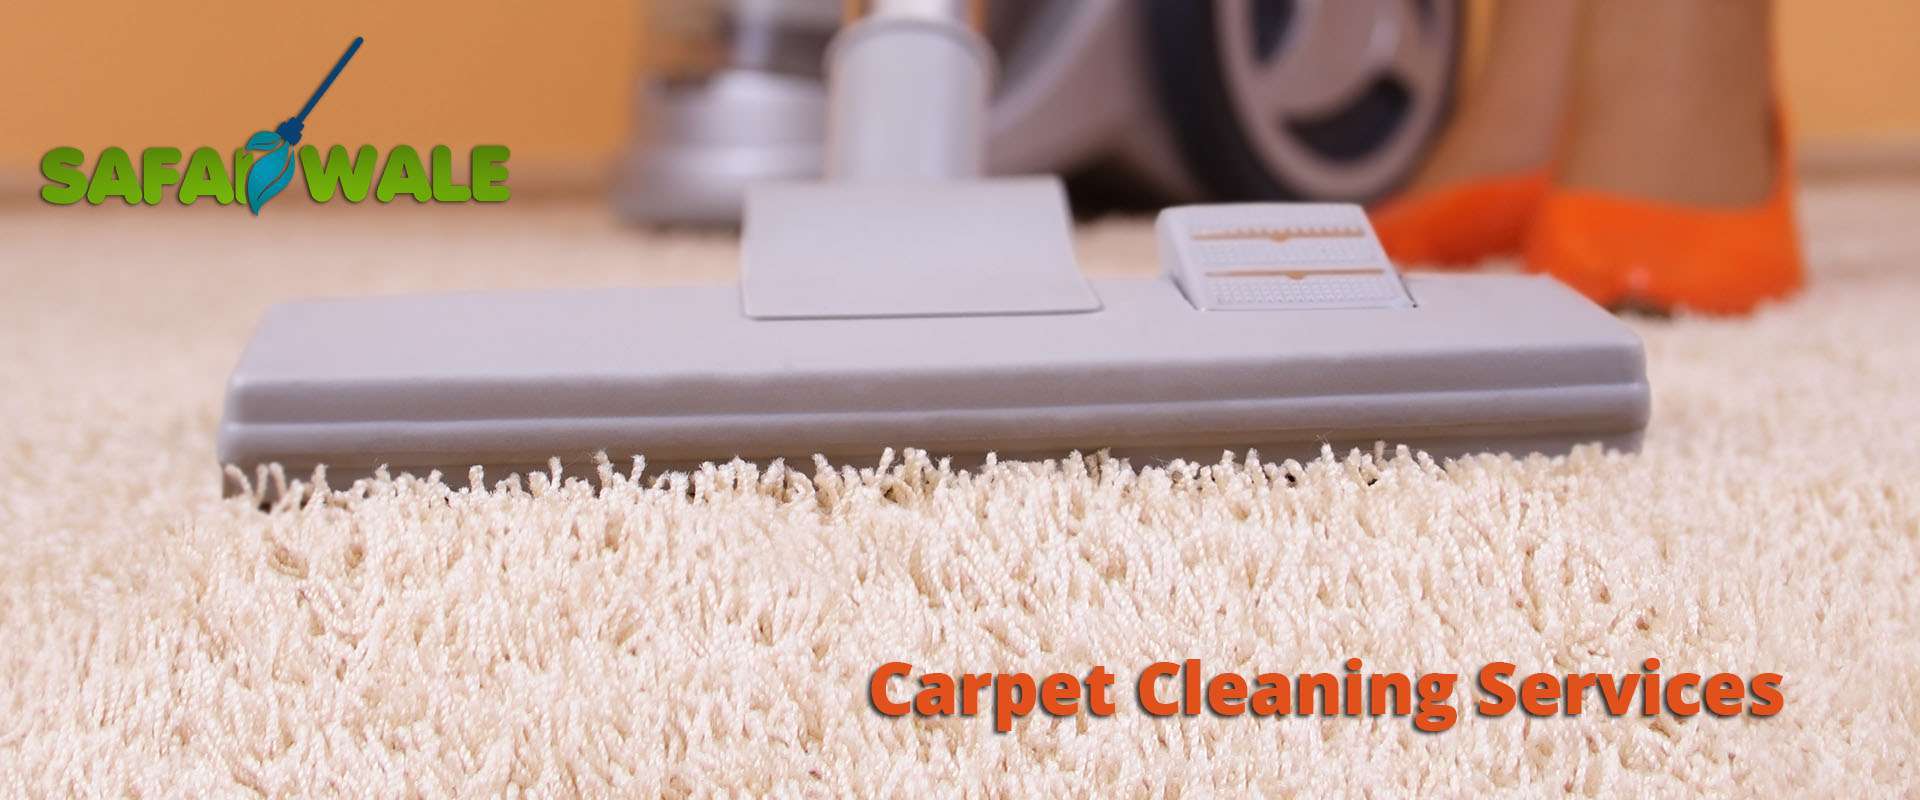 Carpet Cleaning Services In Morta Industrial Area, Ghaziabad